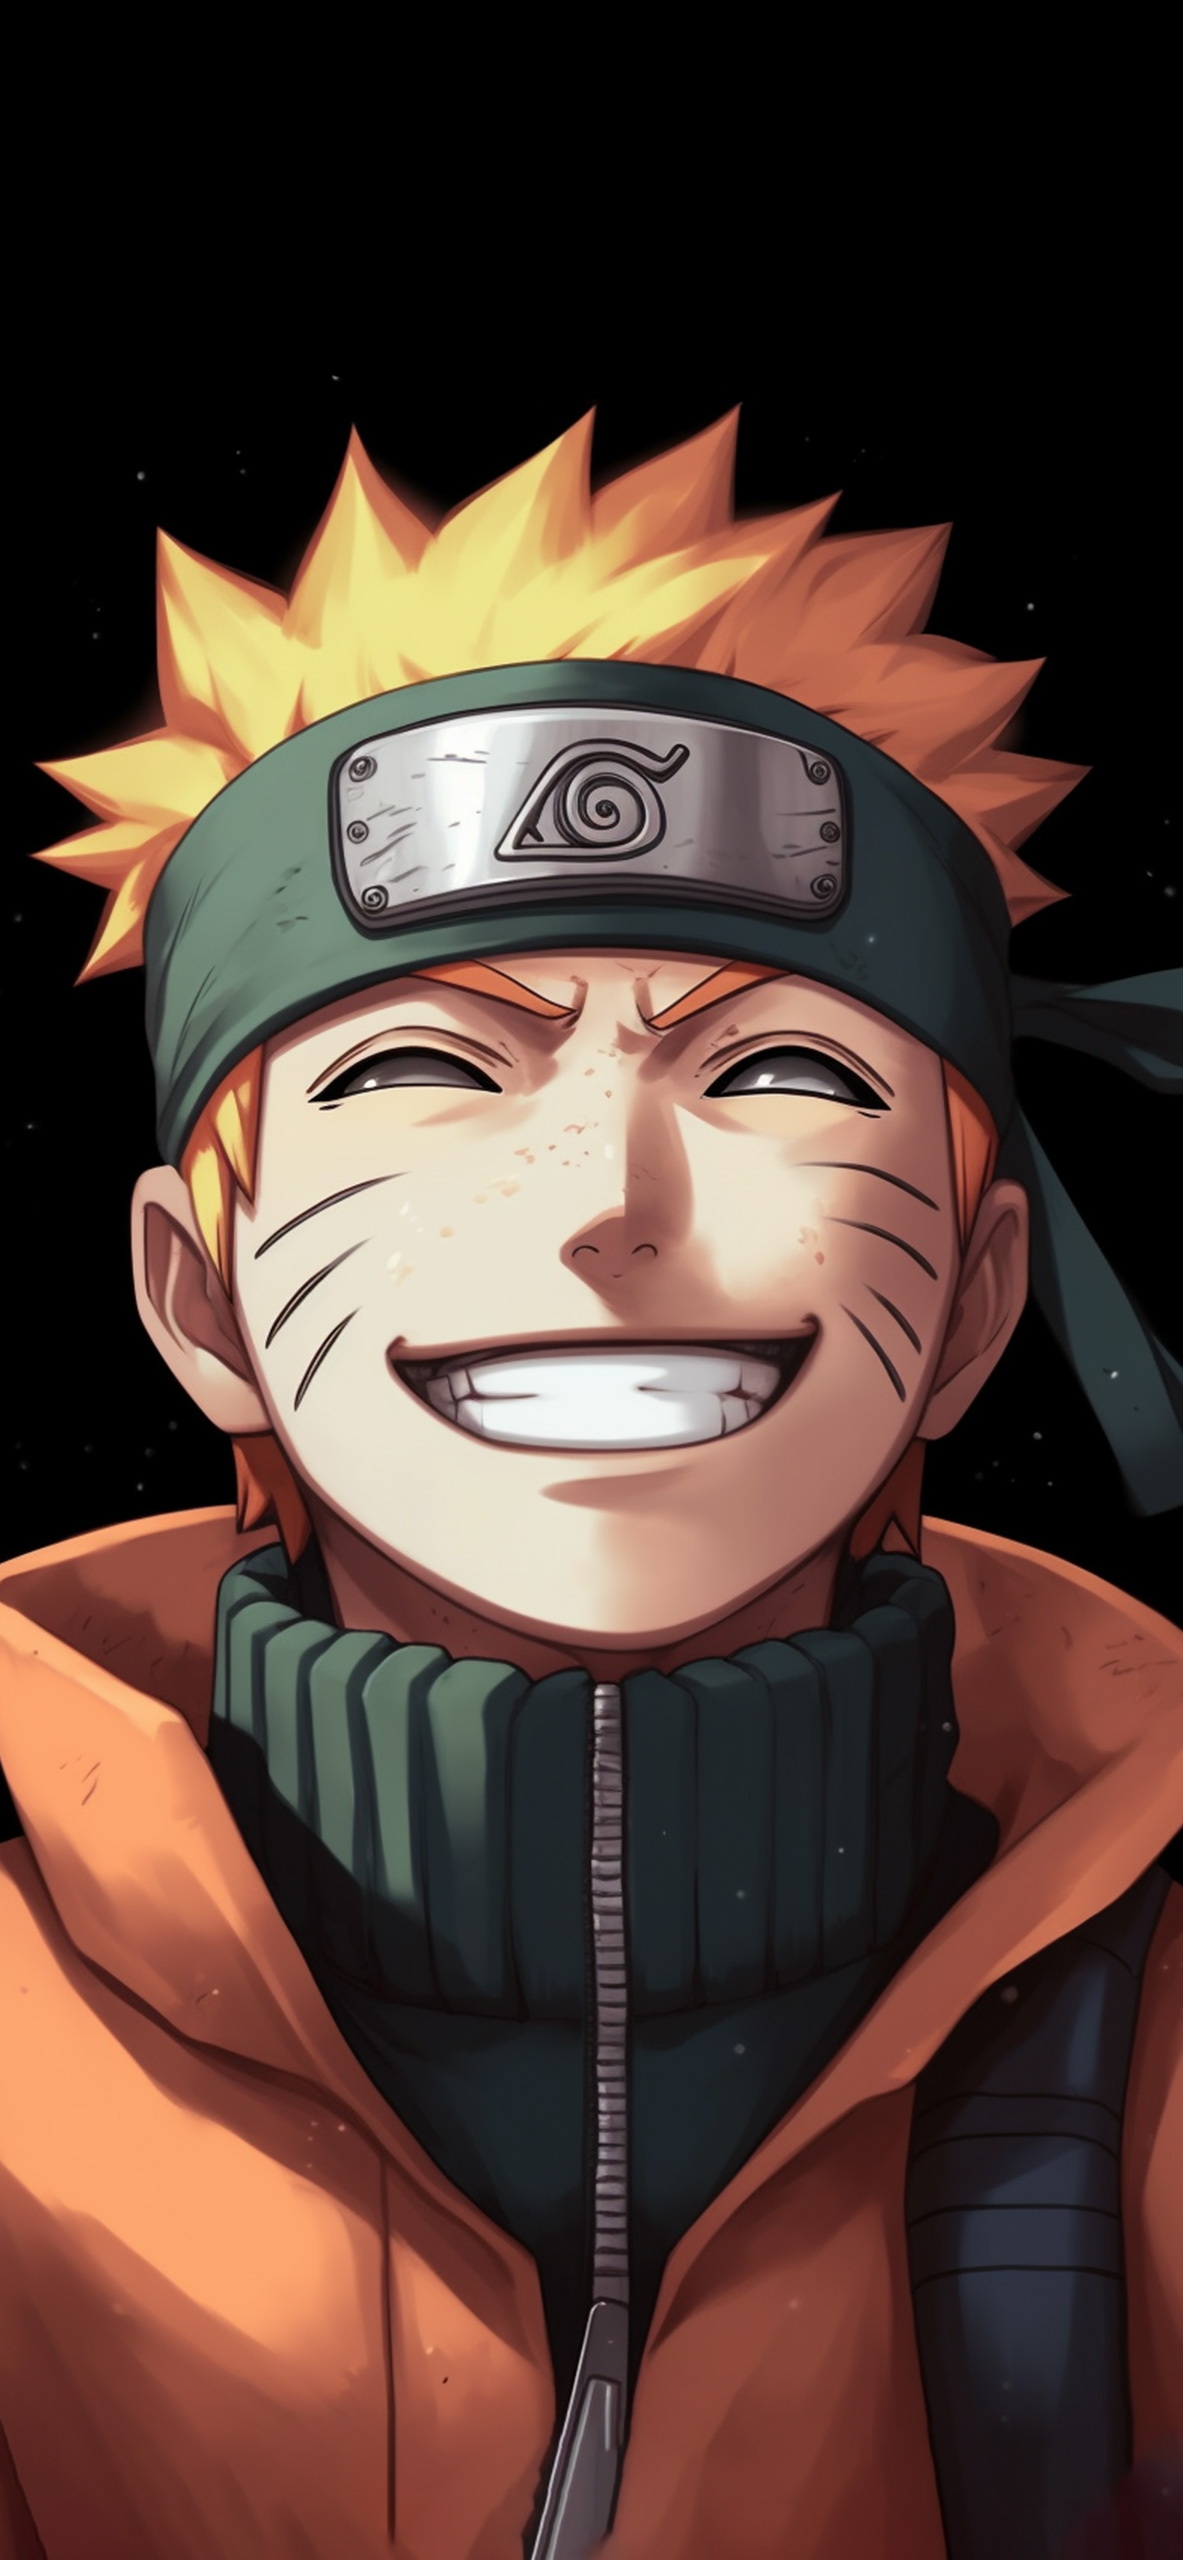 Naruto Mobile HD Wallpapers iPhone, Android and Desktop - The RamenSwag